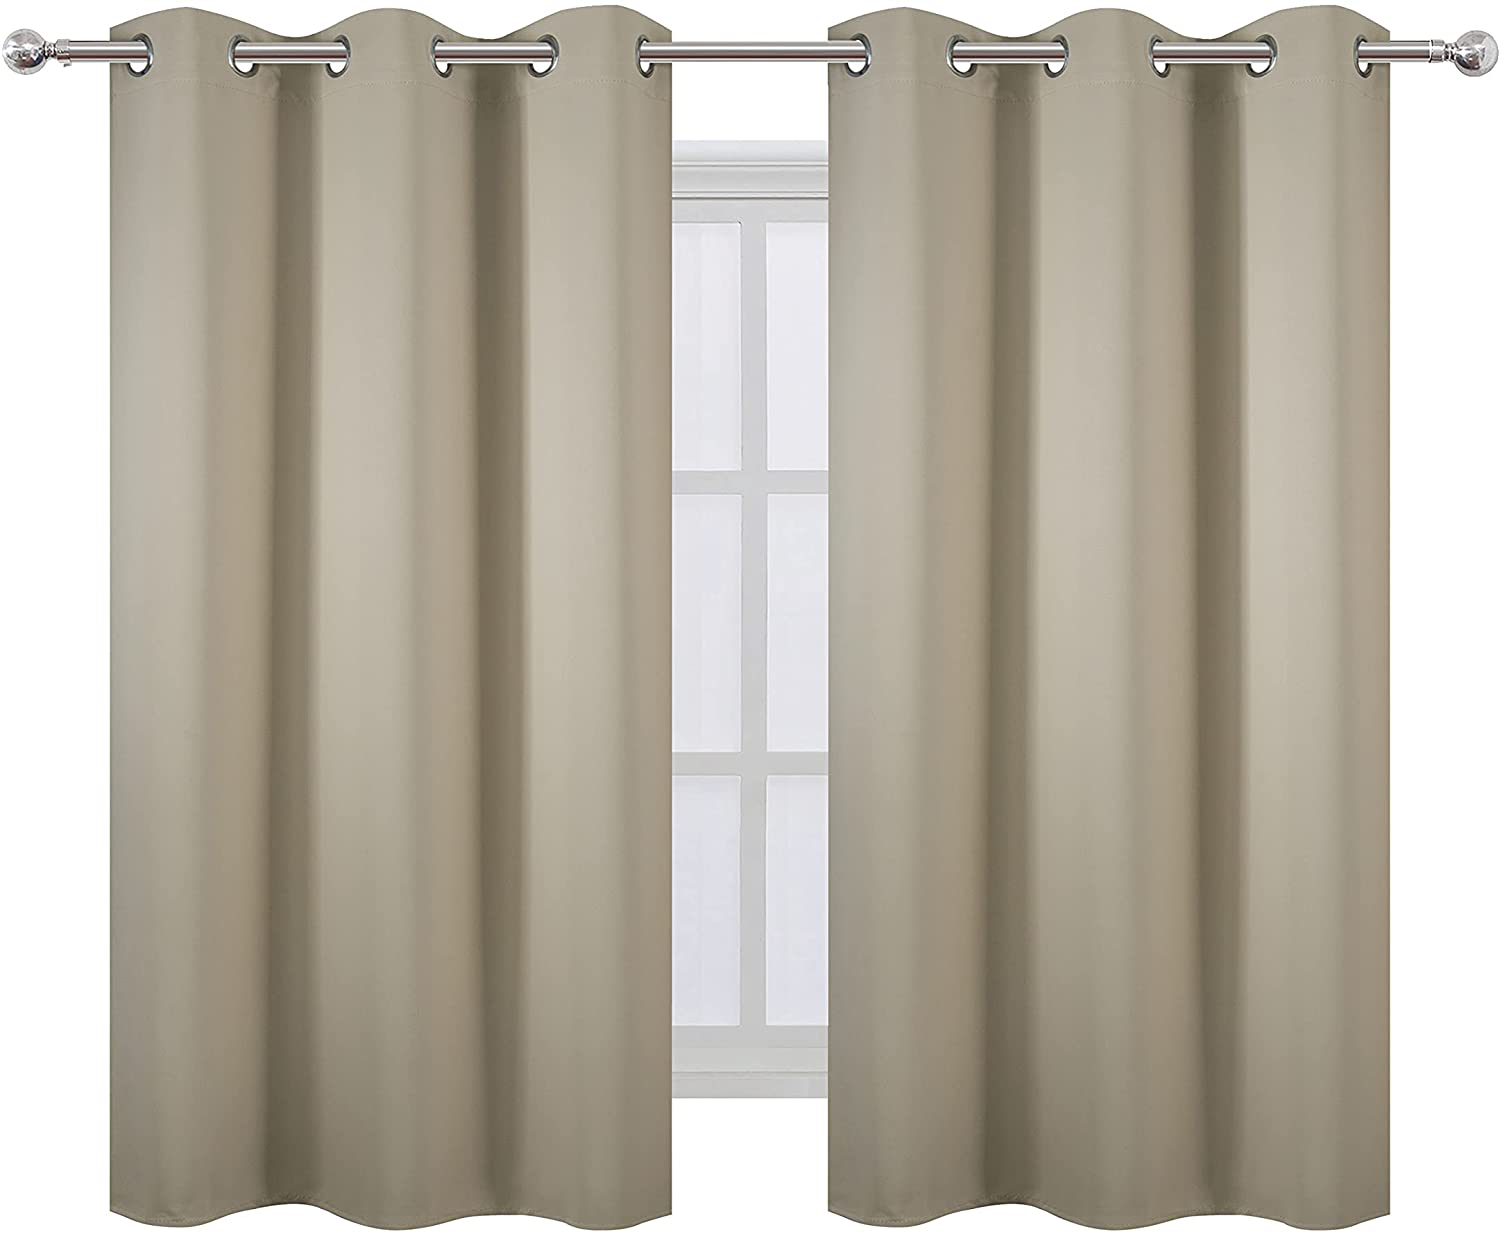 LEMOMO Light Green Bedroom Blackout Curtains for Living Room/42 x 63 Inch Long/Set of 2 Panels Thermal Insulated Fashion Boys Room Curtains